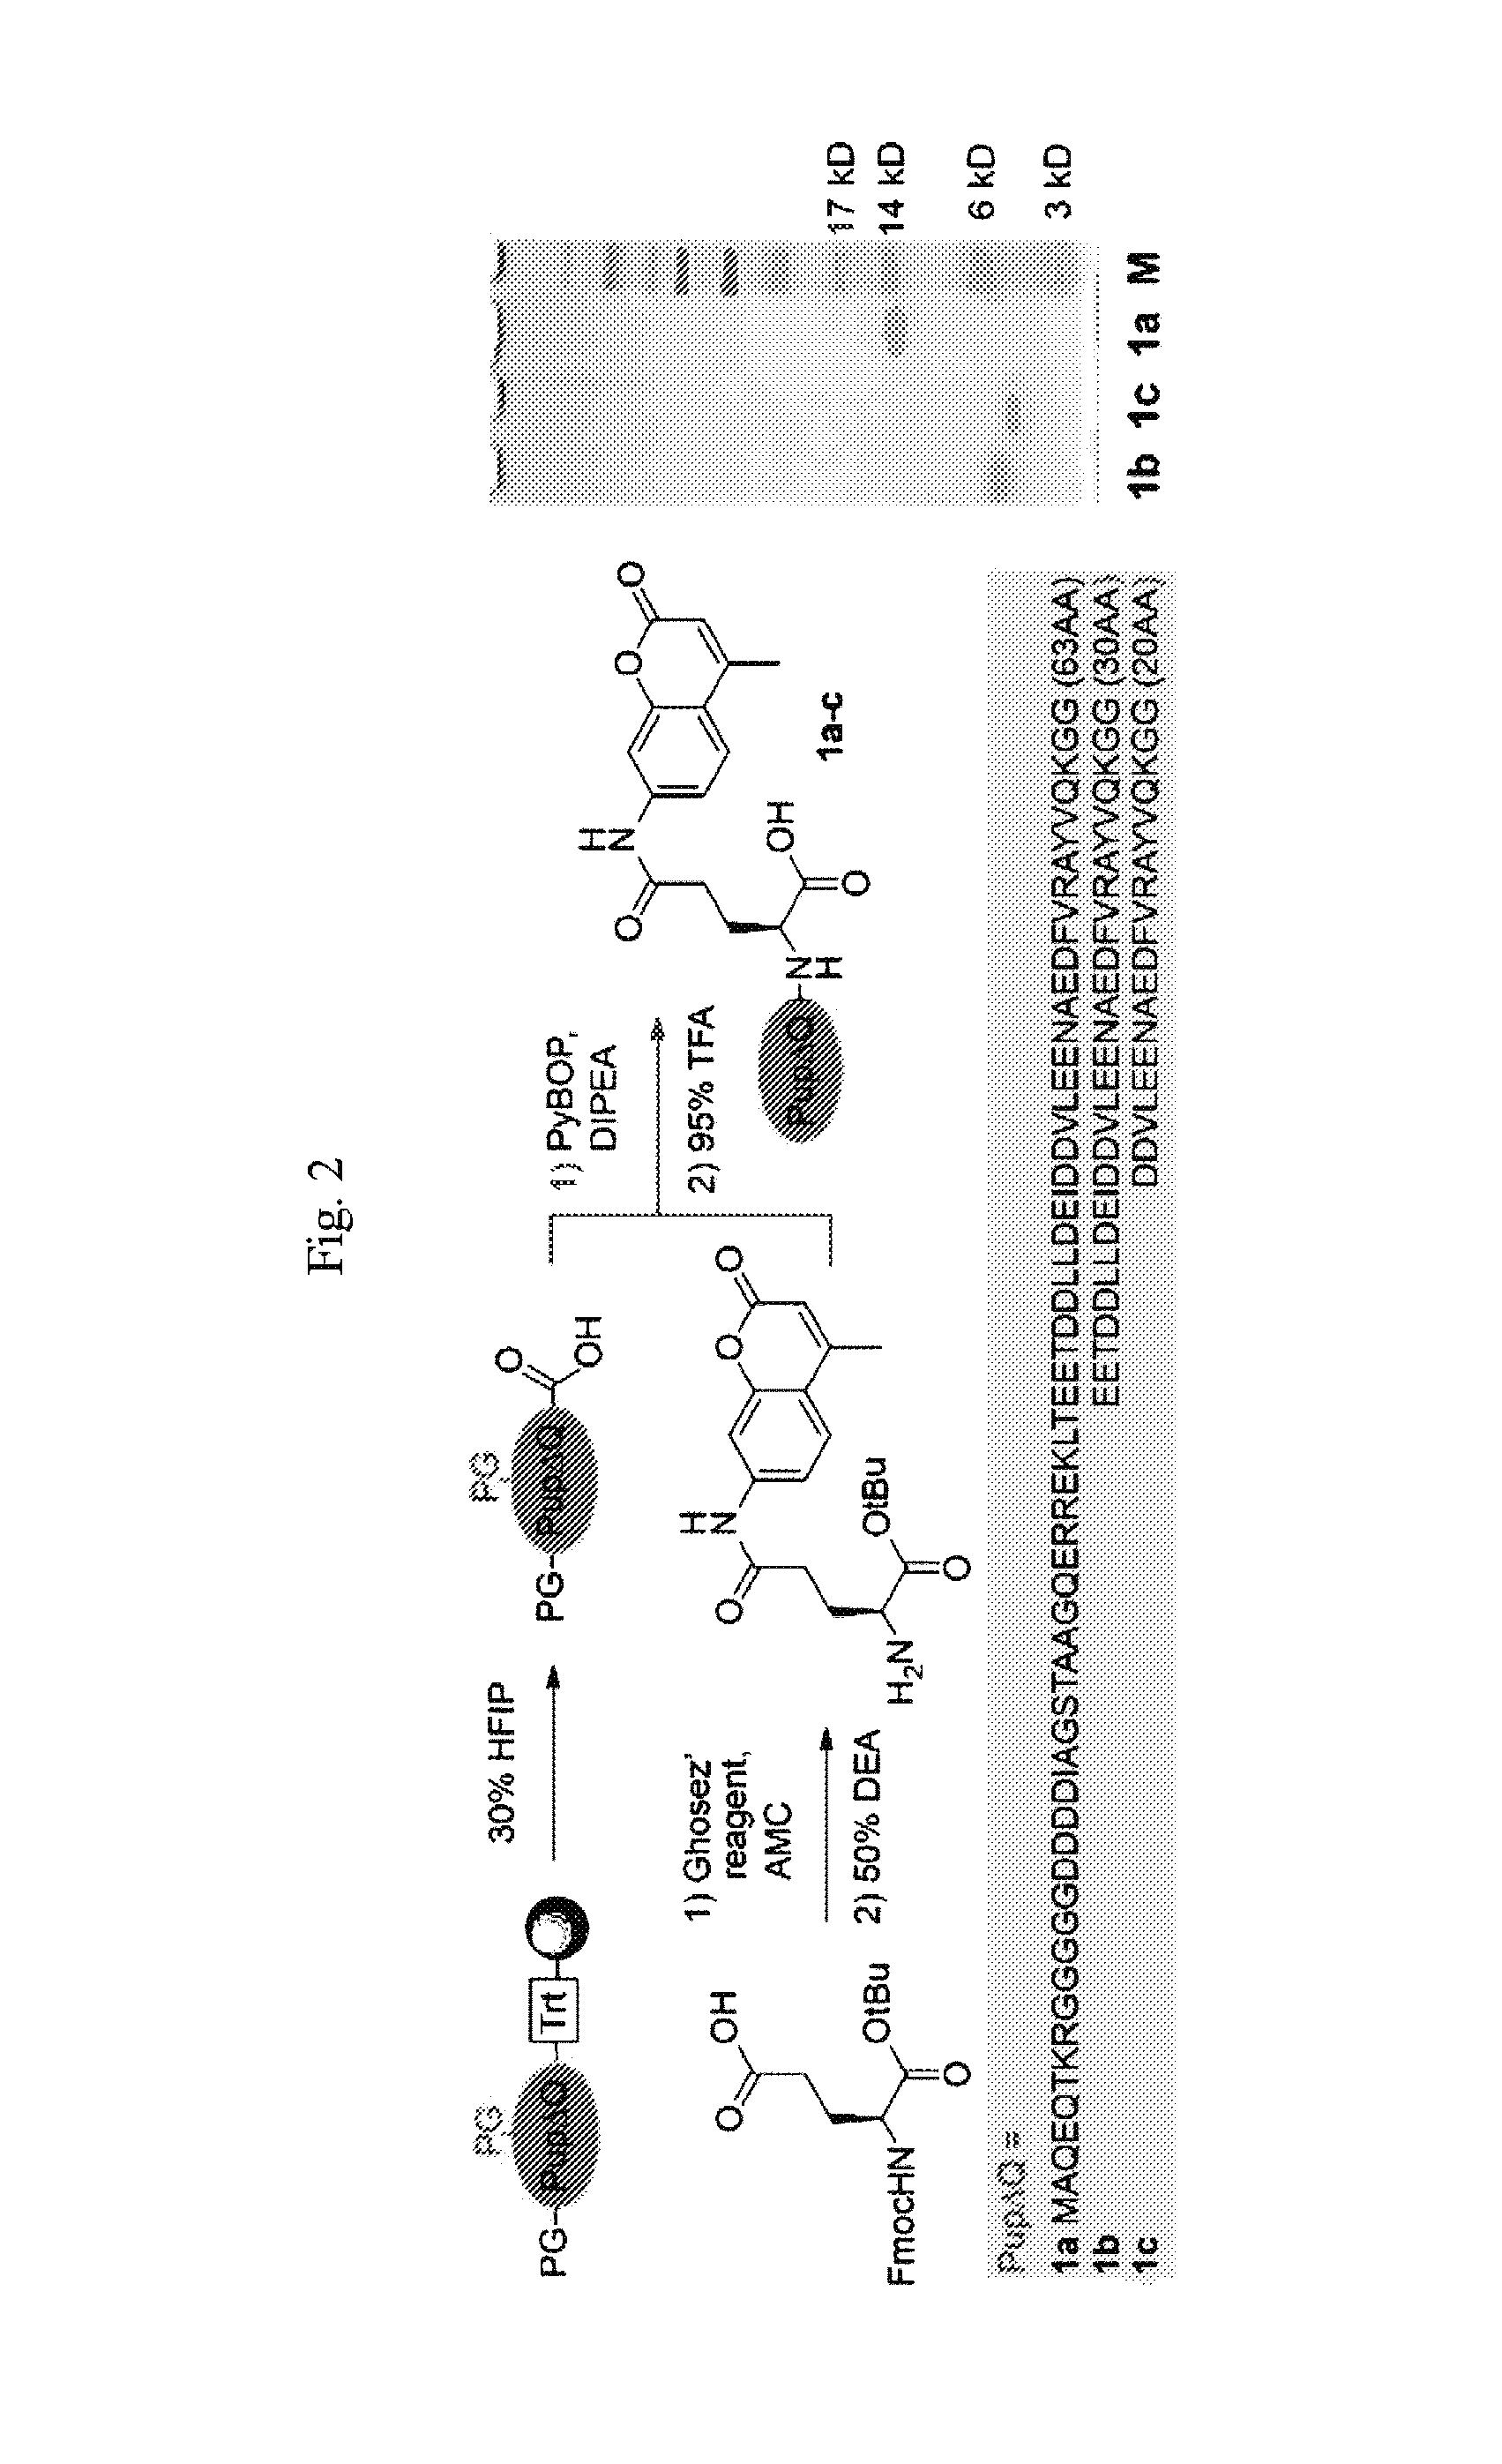 Modified prokaryotic ubiquitin-like protein and methods of use thereof